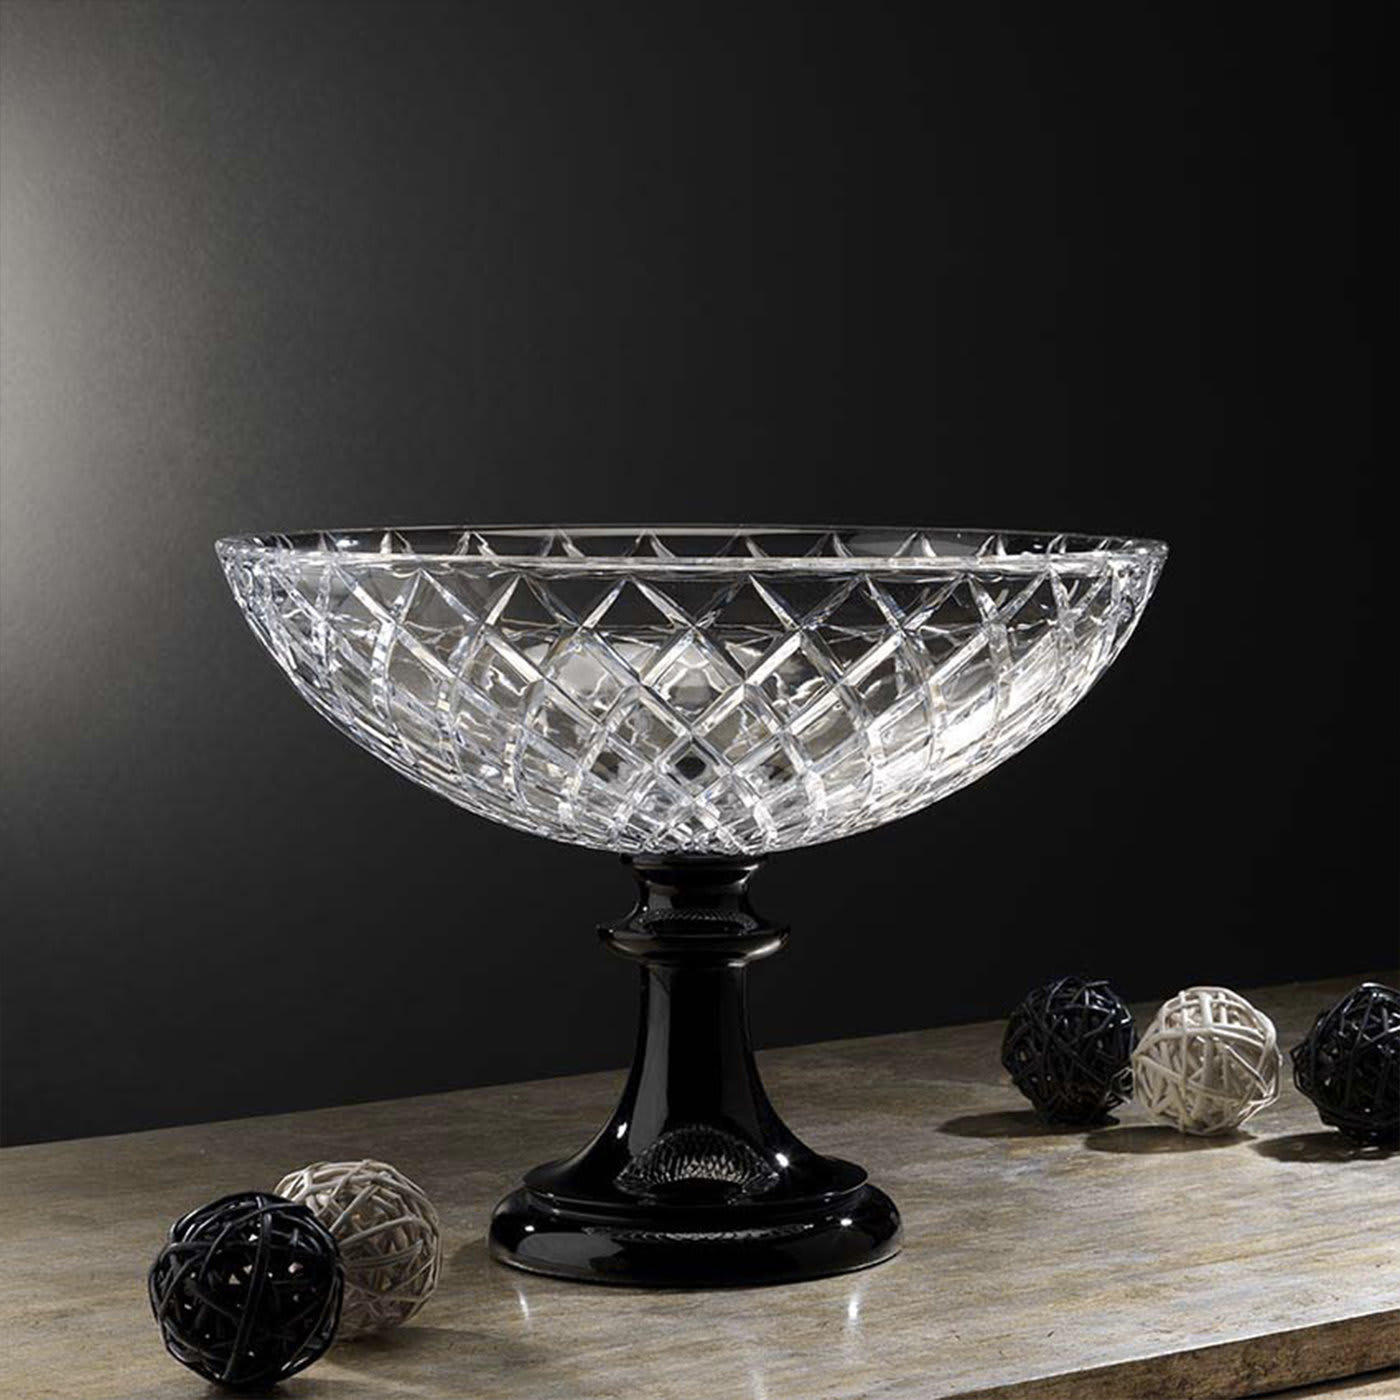 Crystal Centerpiece in Clear and Black - Nuova Cev